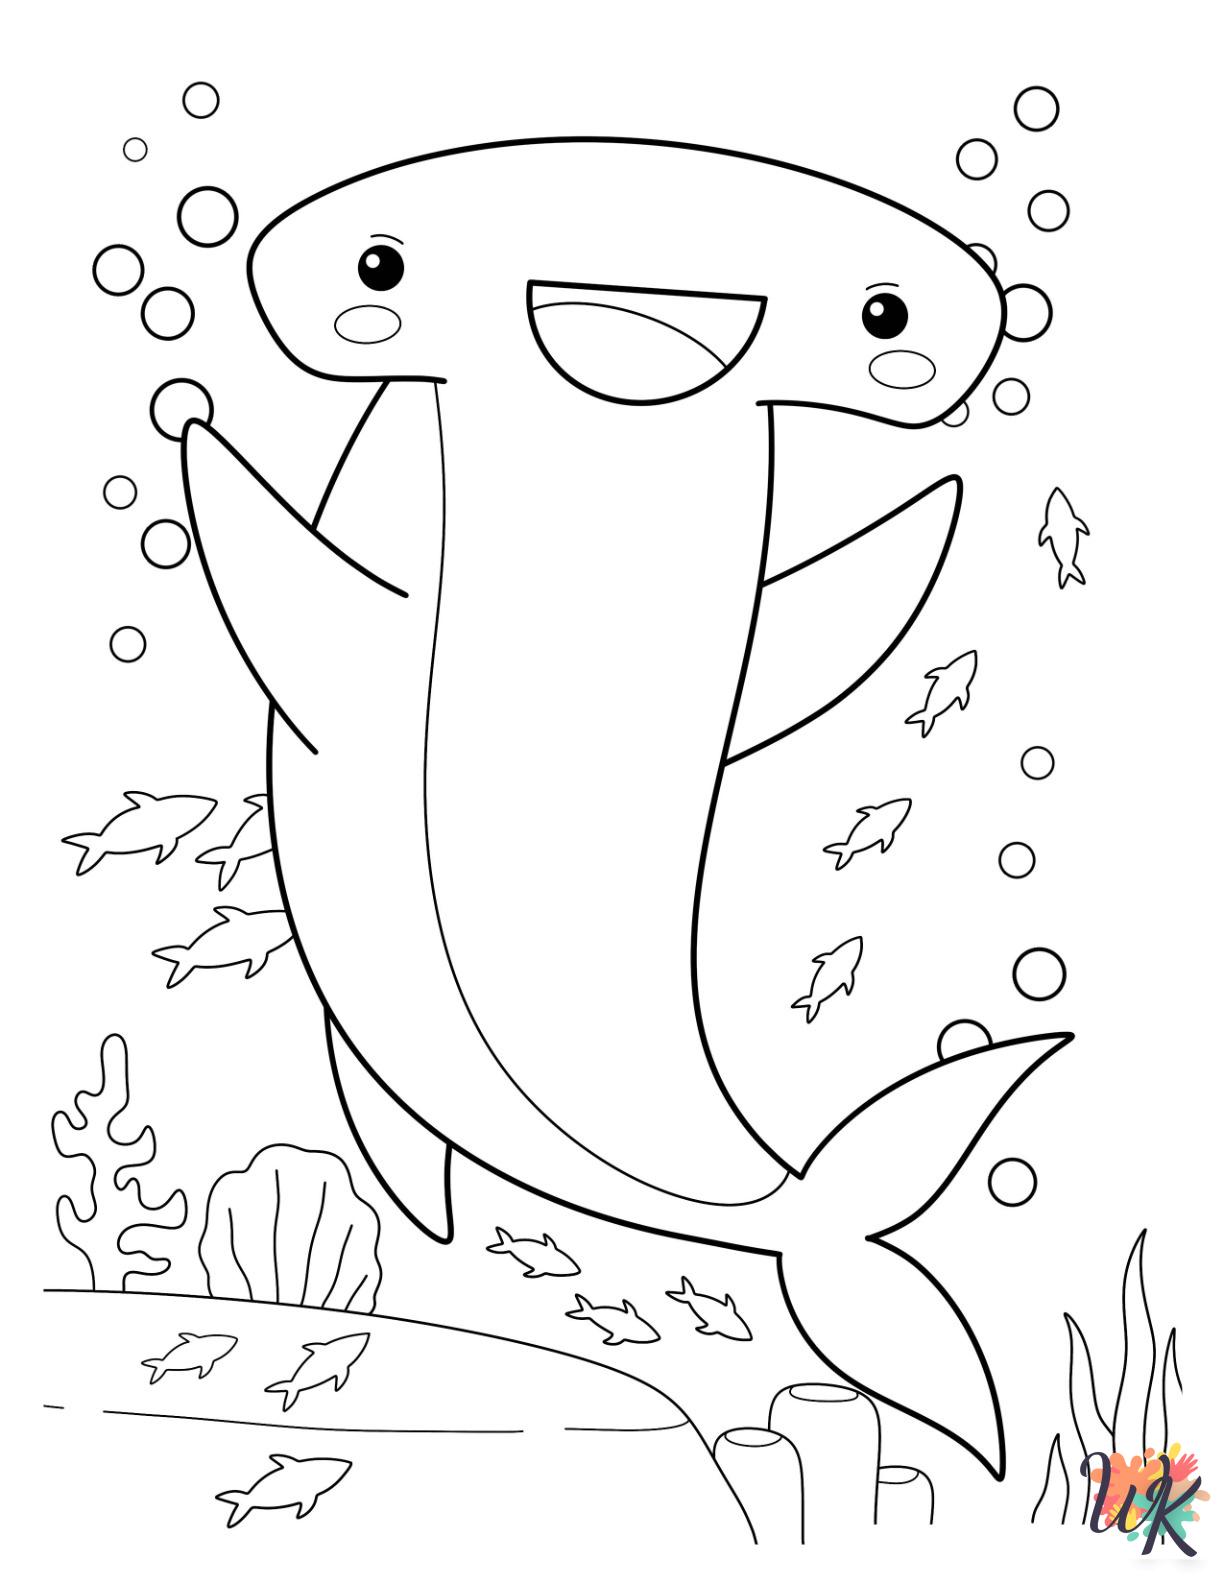 Hammerhead Shark coloring pages free 1